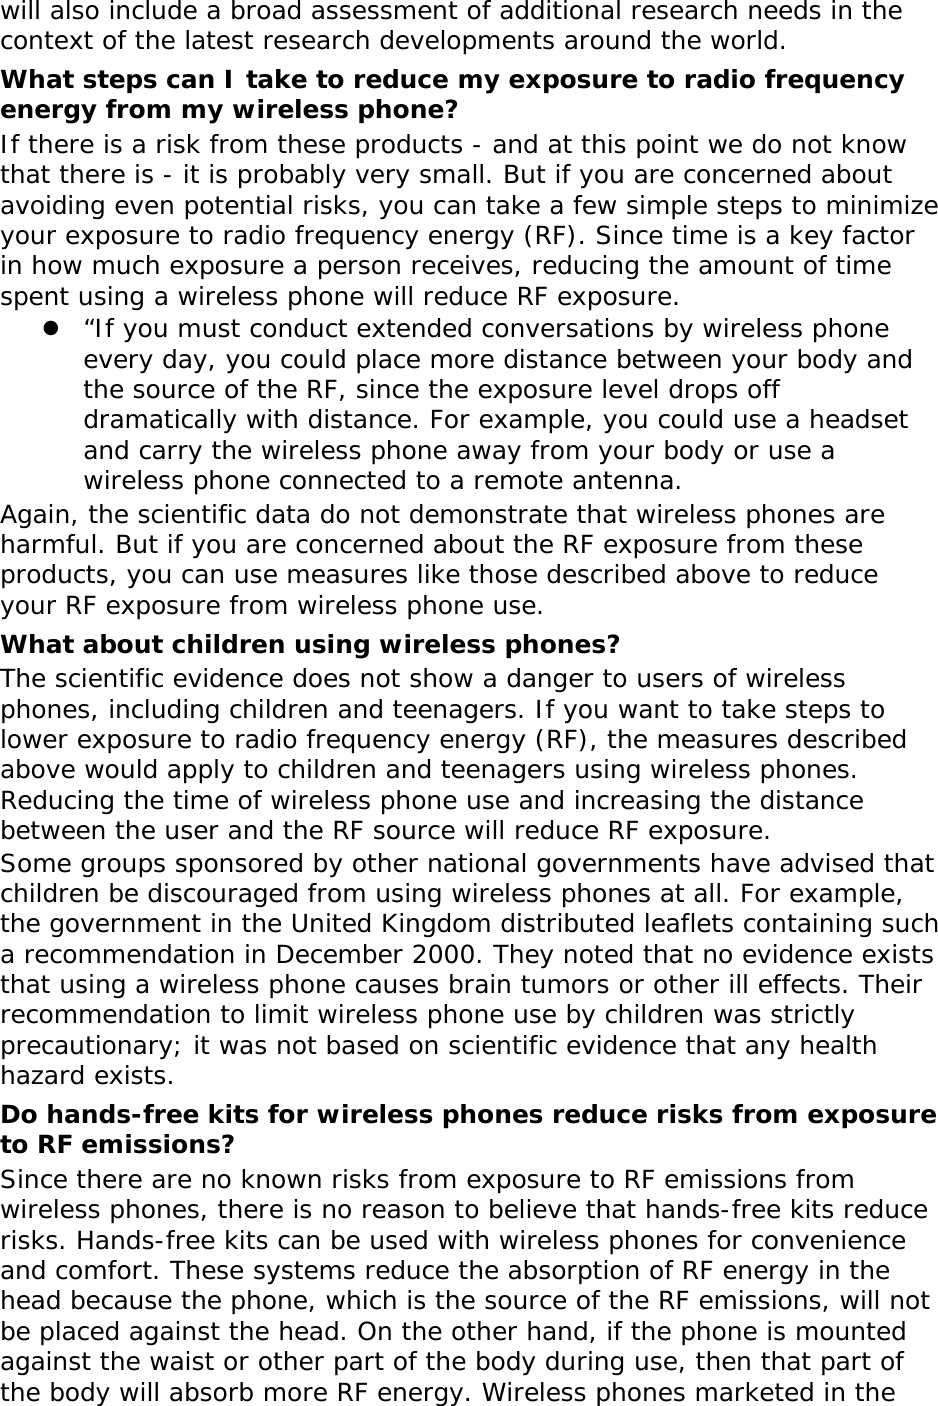 will also include a broad assessment of additional research needs in the context of the latest research developments around the world. What steps can I take to reduce my exposure to radio frequency energy from my wireless phone? If there is a risk from these products - and at this point we do not know that there is - it is probably very small. But if you are concerned about avoiding even potential risks, you can take a few simple steps to minimize your exposure to radio frequency energy (RF). Since time is a key factor in how much exposure a person receives, reducing the amount of time spent using a wireless phone will reduce RF exposure. z “If you must conduct extended conversations by wireless phone every day, you could place more distance between your body and the source of the RF, since the exposure level drops off dramatically with distance. For example, you could use a headset and carry the wireless phone away from your body or use a wireless phone connected to a remote antenna. Again, the scientific data do not demonstrate that wireless phones are harmful. But if you are concerned about the RF exposure from these products, you can use measures like those described above to reduce your RF exposure from wireless phone use. What about children using wireless phones? The scientific evidence does not show a danger to users of wireless phones, including children and teenagers. If you want to take steps to lower exposure to radio frequency energy (RF), the measures described above would apply to children and teenagers using wireless phones. Reducing the time of wireless phone use and increasing the distance between the user and the RF source will reduce RF exposure. Some groups sponsored by other national governments have advised that children be discouraged from using wireless phones at all. For example, the government in the United Kingdom distributed leaflets containing such a recommendation in December 2000. They noted that no evidence exists that using a wireless phone causes brain tumors or other ill effects. Their recommendation to limit wireless phone use by children was strictly precautionary; it was not based on scientific evidence that any health hazard exists.  Do hands-free kits for wireless phones reduce risks from exposure to RF emissions? Since there are no known risks from exposure to RF emissions from wireless phones, there is no reason to believe that hands-free kits reduce risks. Hands-free kits can be used with wireless phones for convenience and comfort. These systems reduce the absorption of RF energy in the head because the phone, which is the source of the RF emissions, will not be placed against the head. On the other hand, if the phone is mounted against the waist or other part of the body during use, then that part of the body will absorb more RF energy. Wireless phones marketed in the 